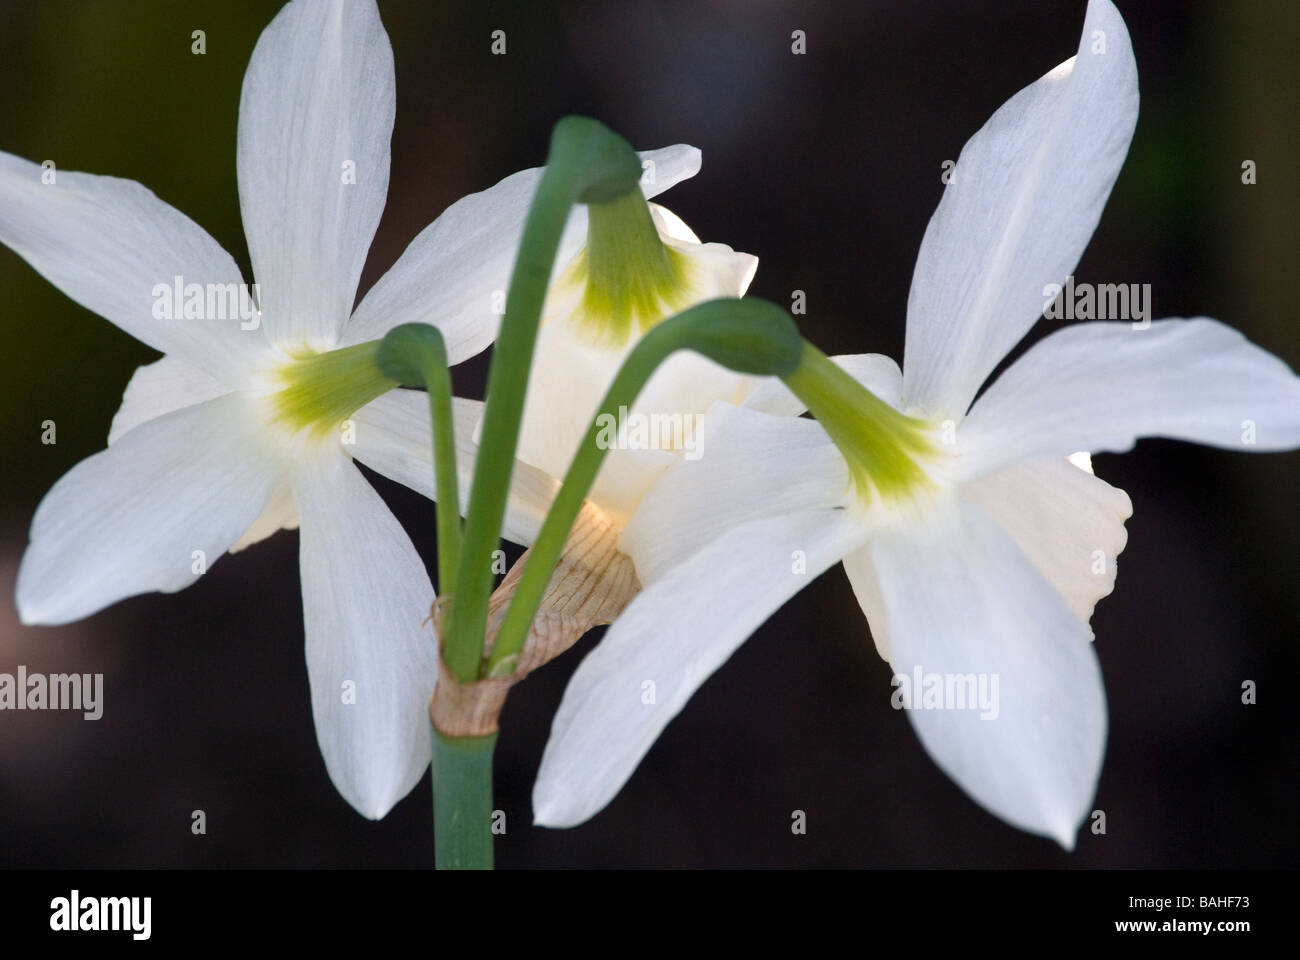 Narcissus Amaryllidaceae, Spring flowering pale cream Daffodil, close up of 3 flowers facing away from camera Stock Photo